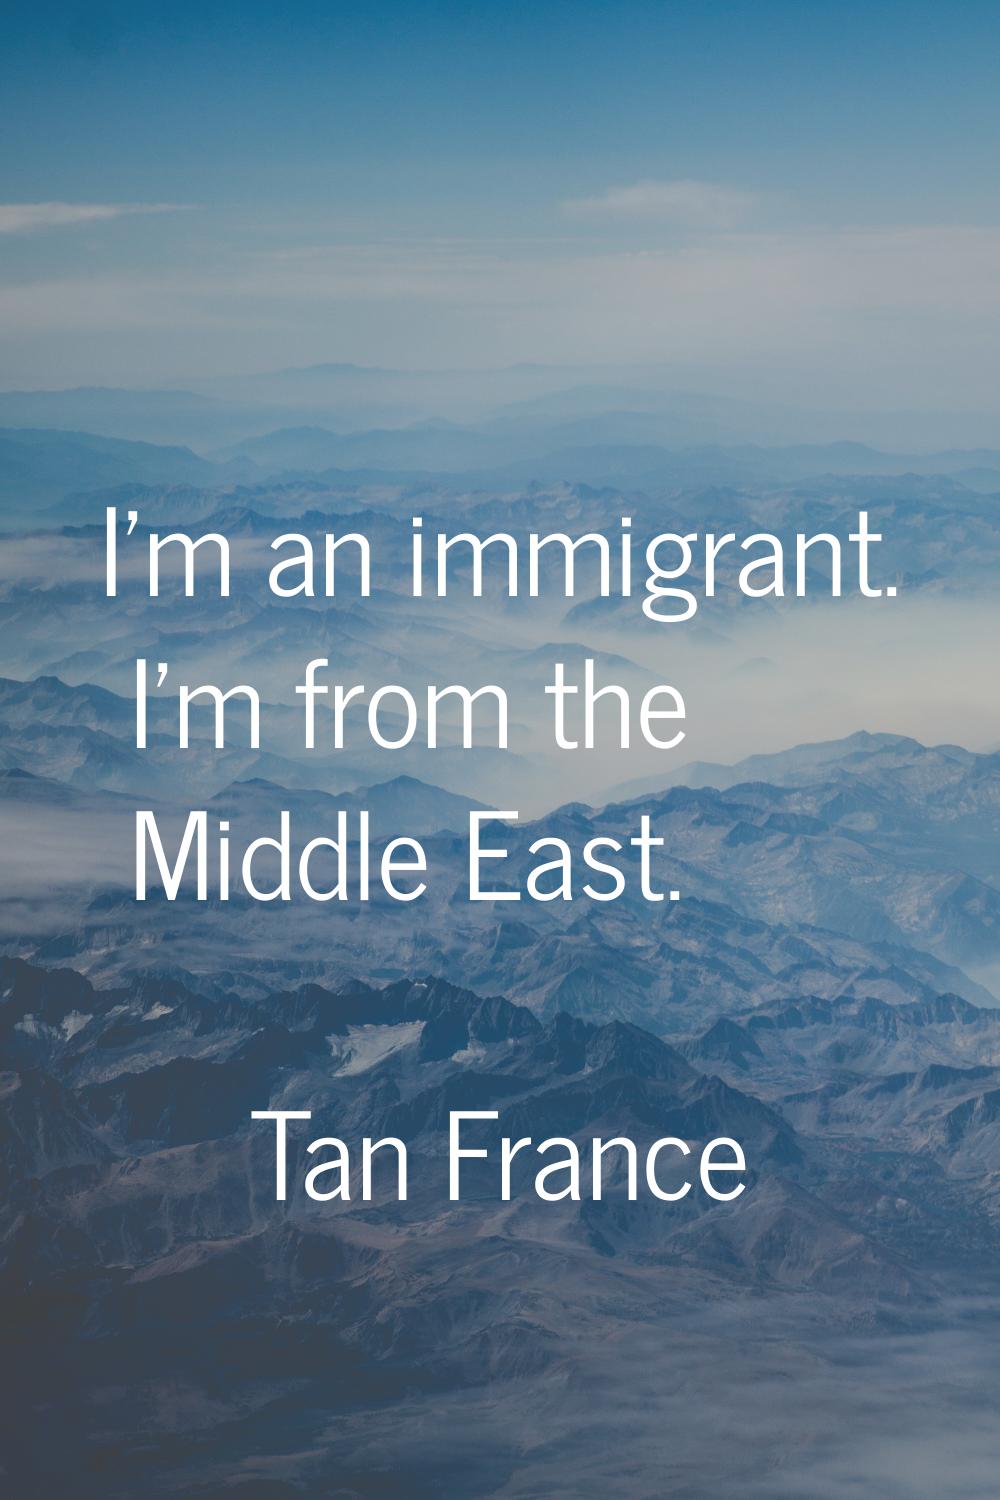 I'm an immigrant. I'm from the Middle East.